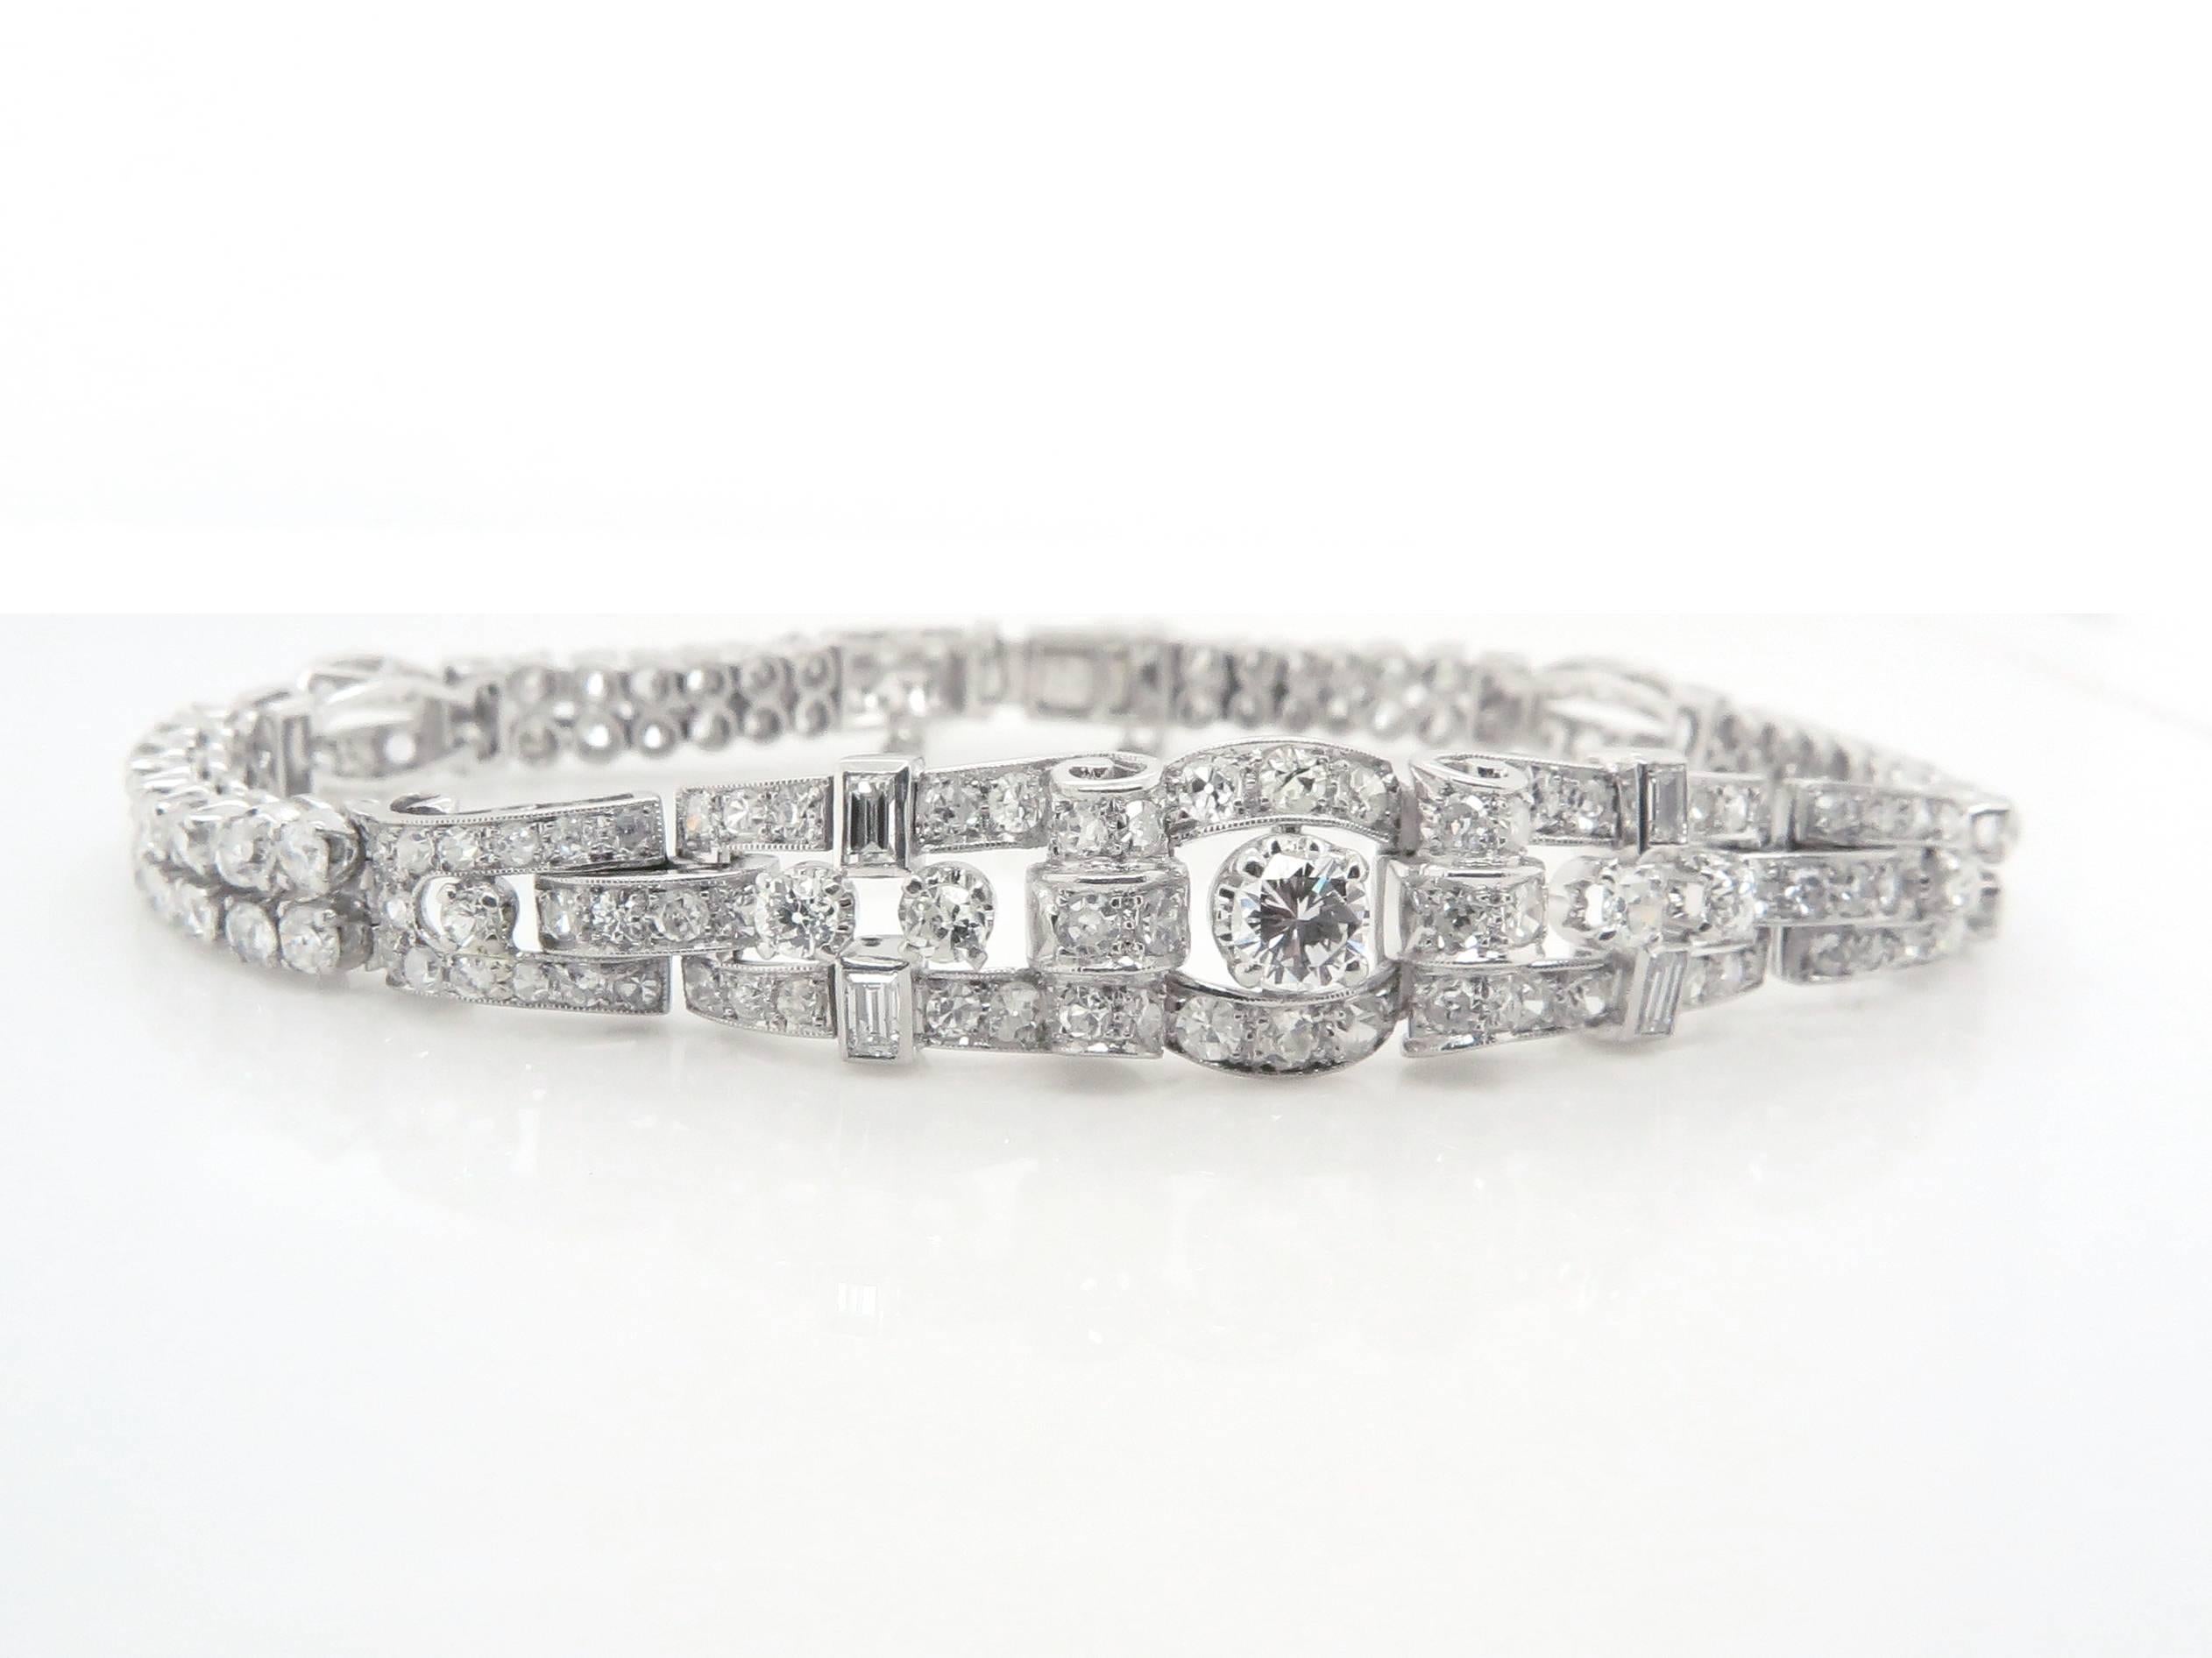 The bracelet is centred with a brilliant cut diamond, flanked by six old-fashioned cut Diamond and grain set with baguette cut diamonds. 

Estimated Total weight of the Diamonds - 5.45 Carats
Total weight of the bracelet - 25.6 grams

